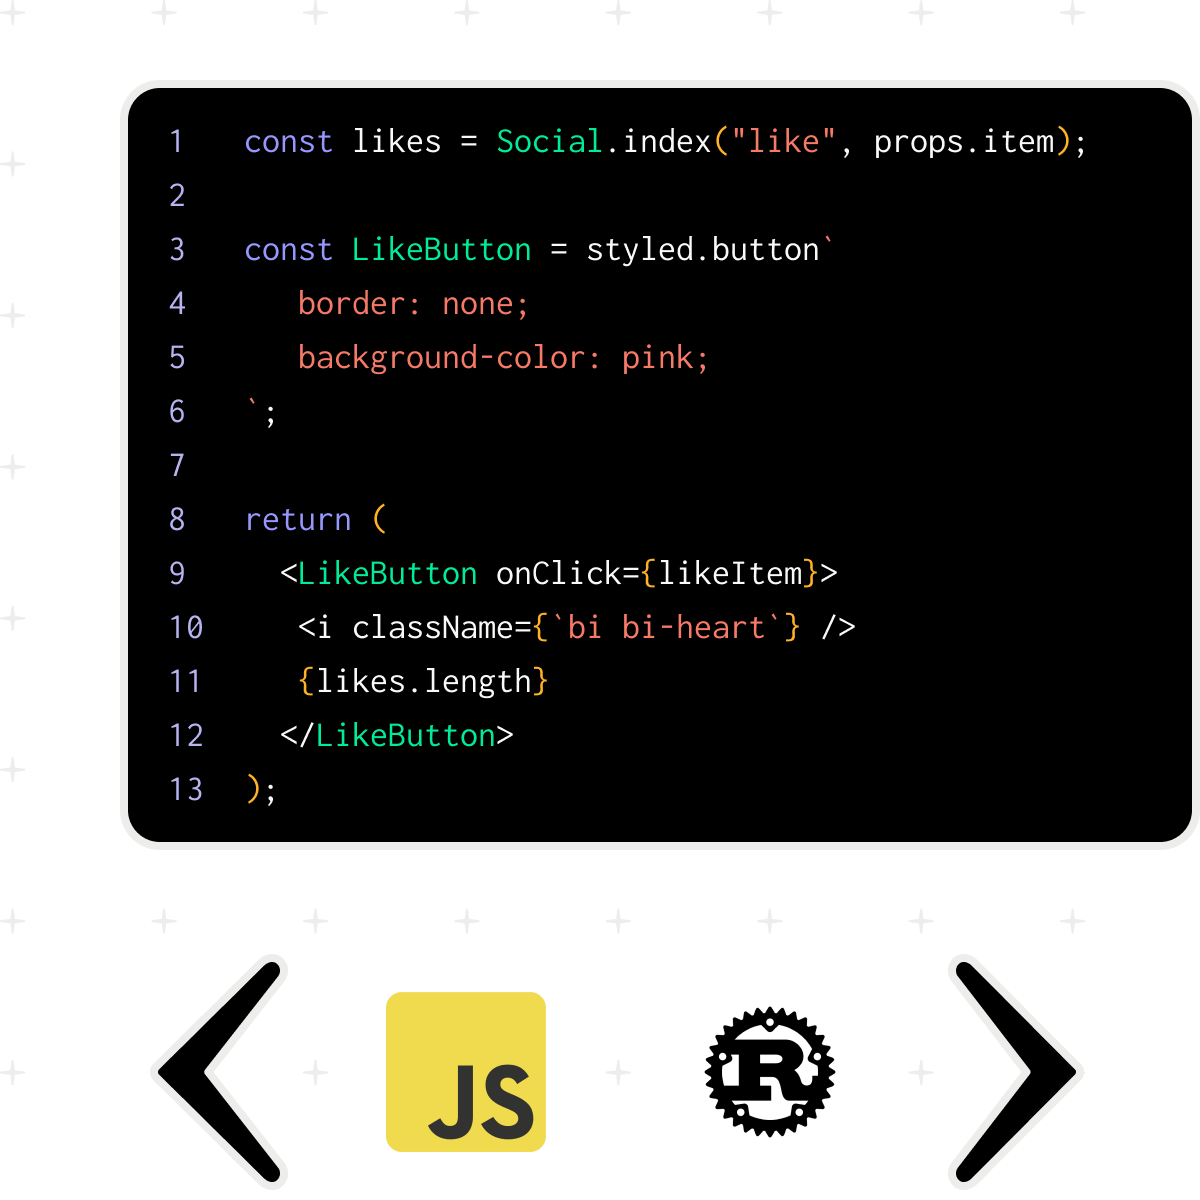 Illustration of a console with javascript code above the Javascript and Rust logos, surrounded by brackets